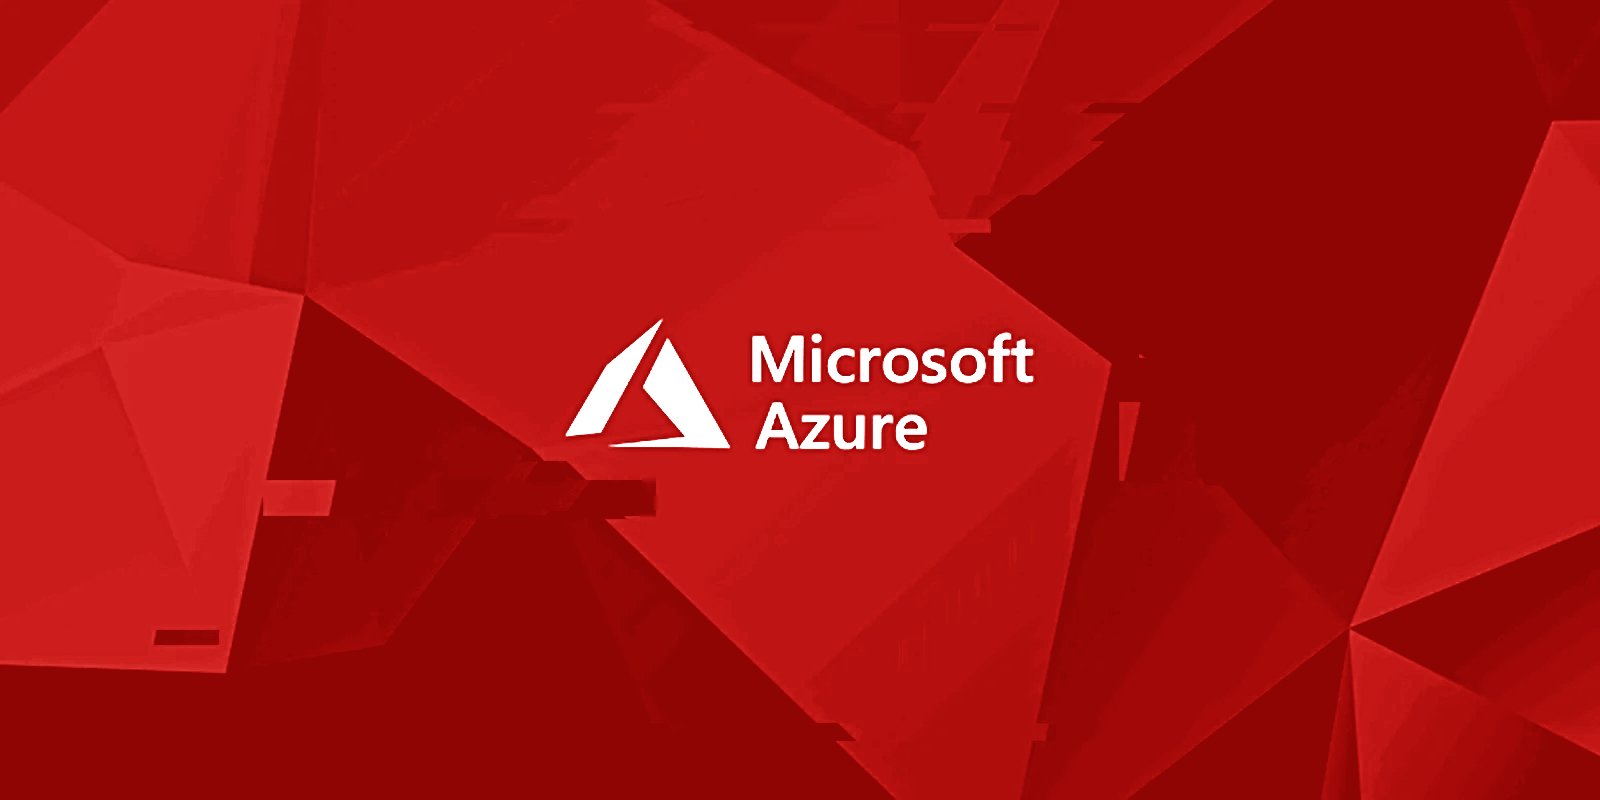 microsoft:-azure-portal-outage-was-caused-by-traffic-“spike”